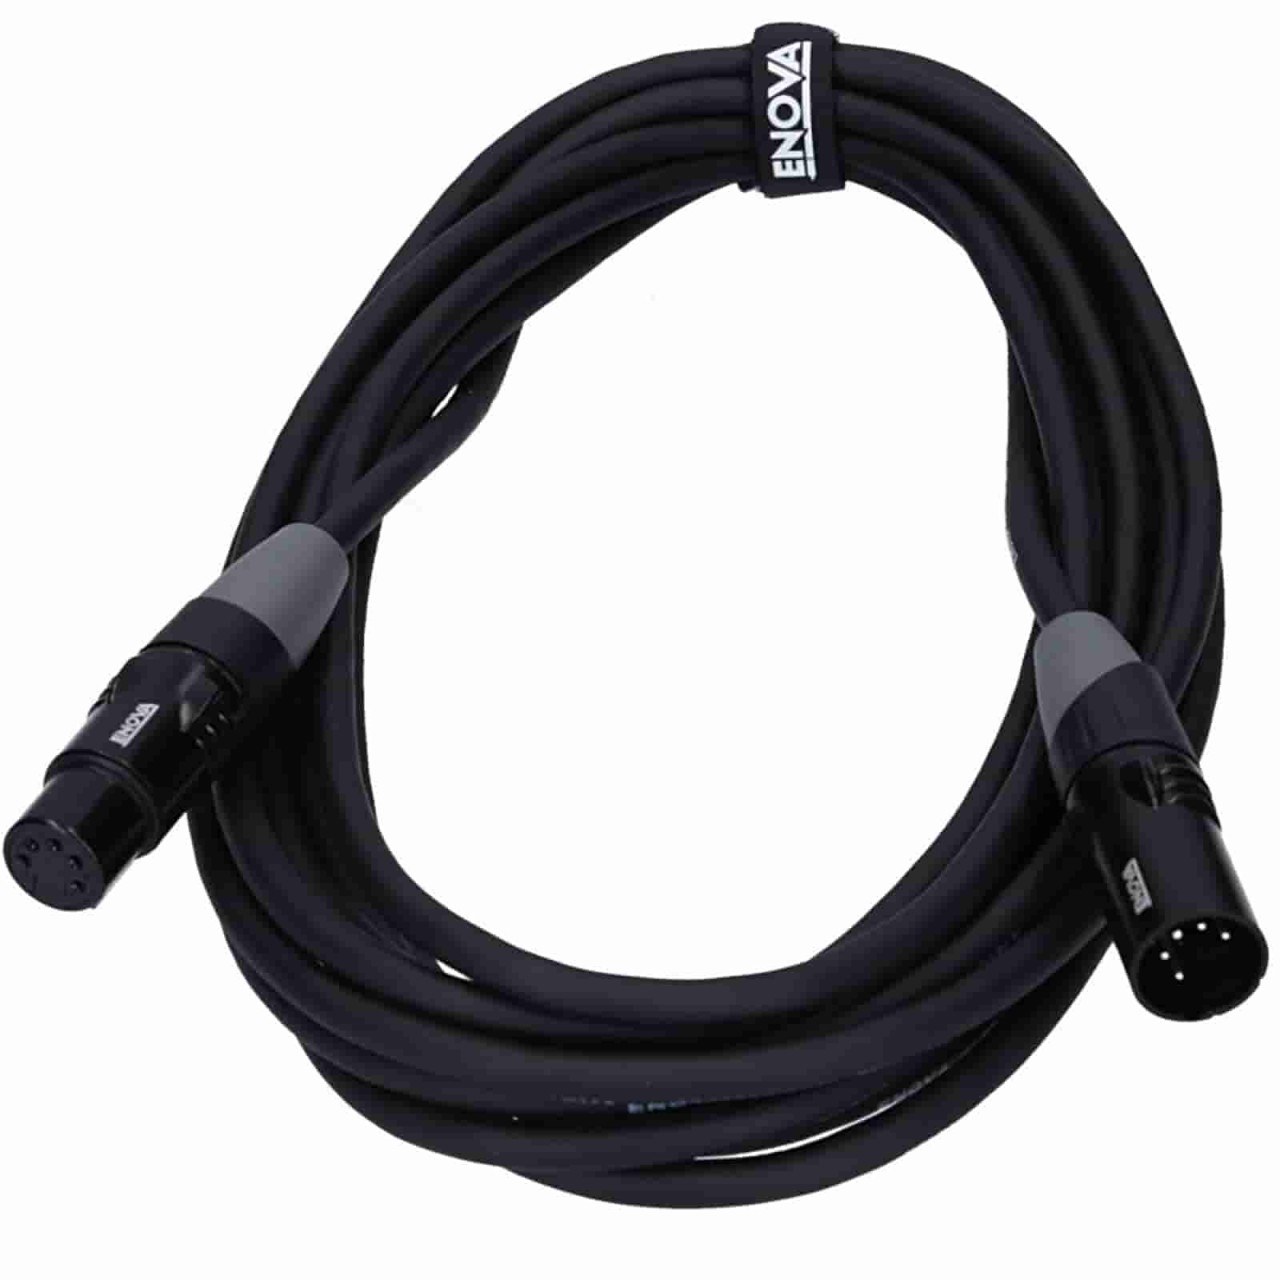 3 meter DMX cable with 5 pin XLR connector and velcro